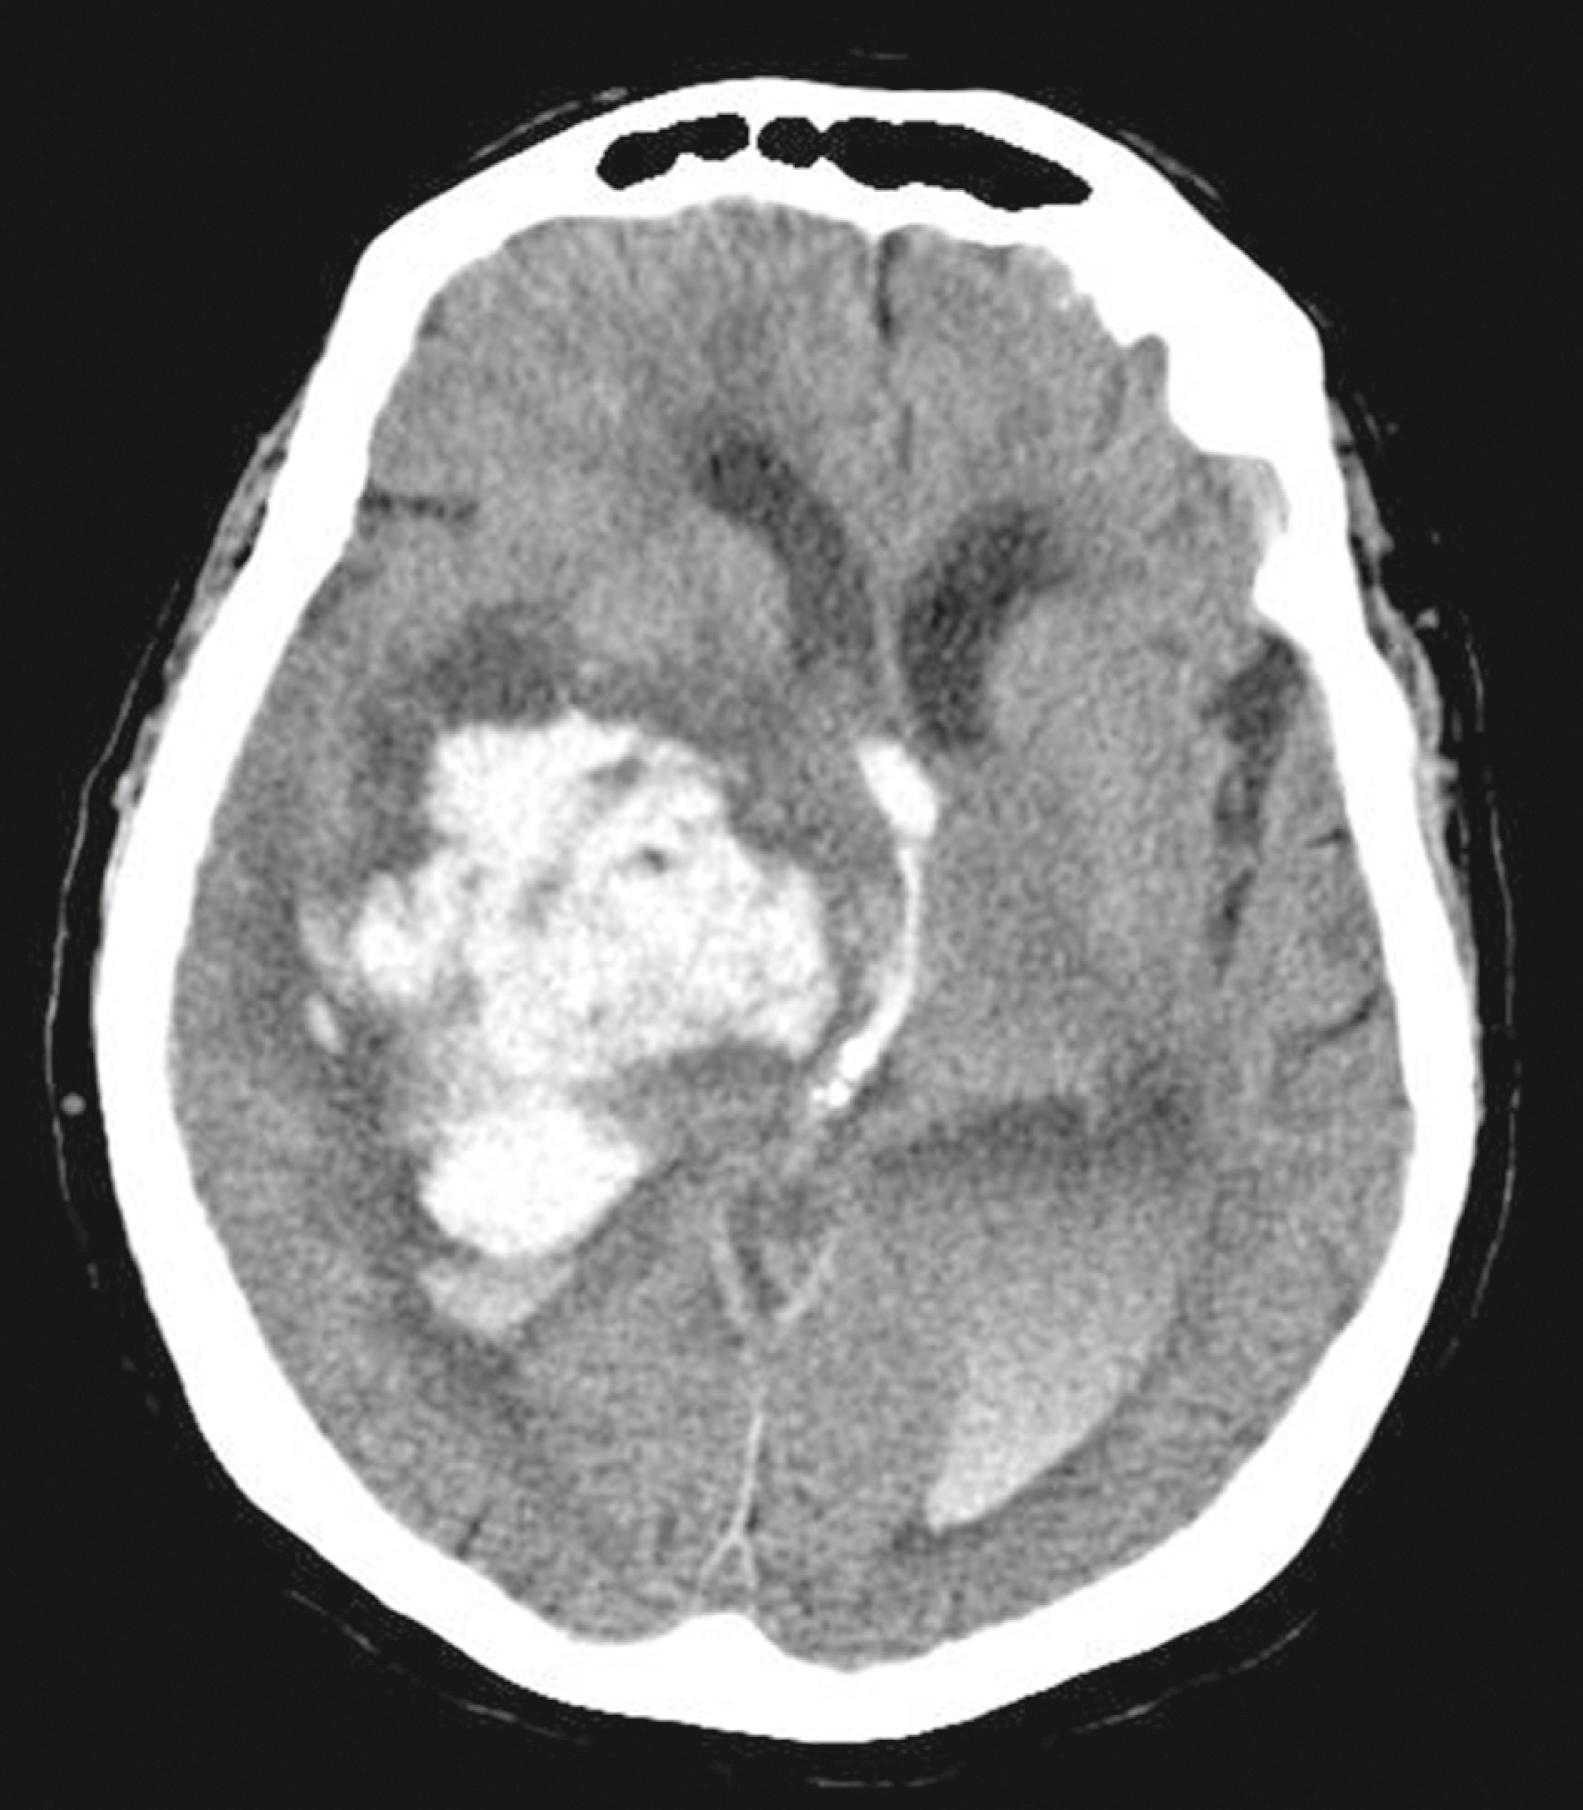 Figure 10.4, Non–contrast-enhanced computed tomographic image of the head, demonstrating an acute right thalamic hypertensive hemorrhage, midline shift to the left, intraventricular hemorrhage, and hydrocephalus.